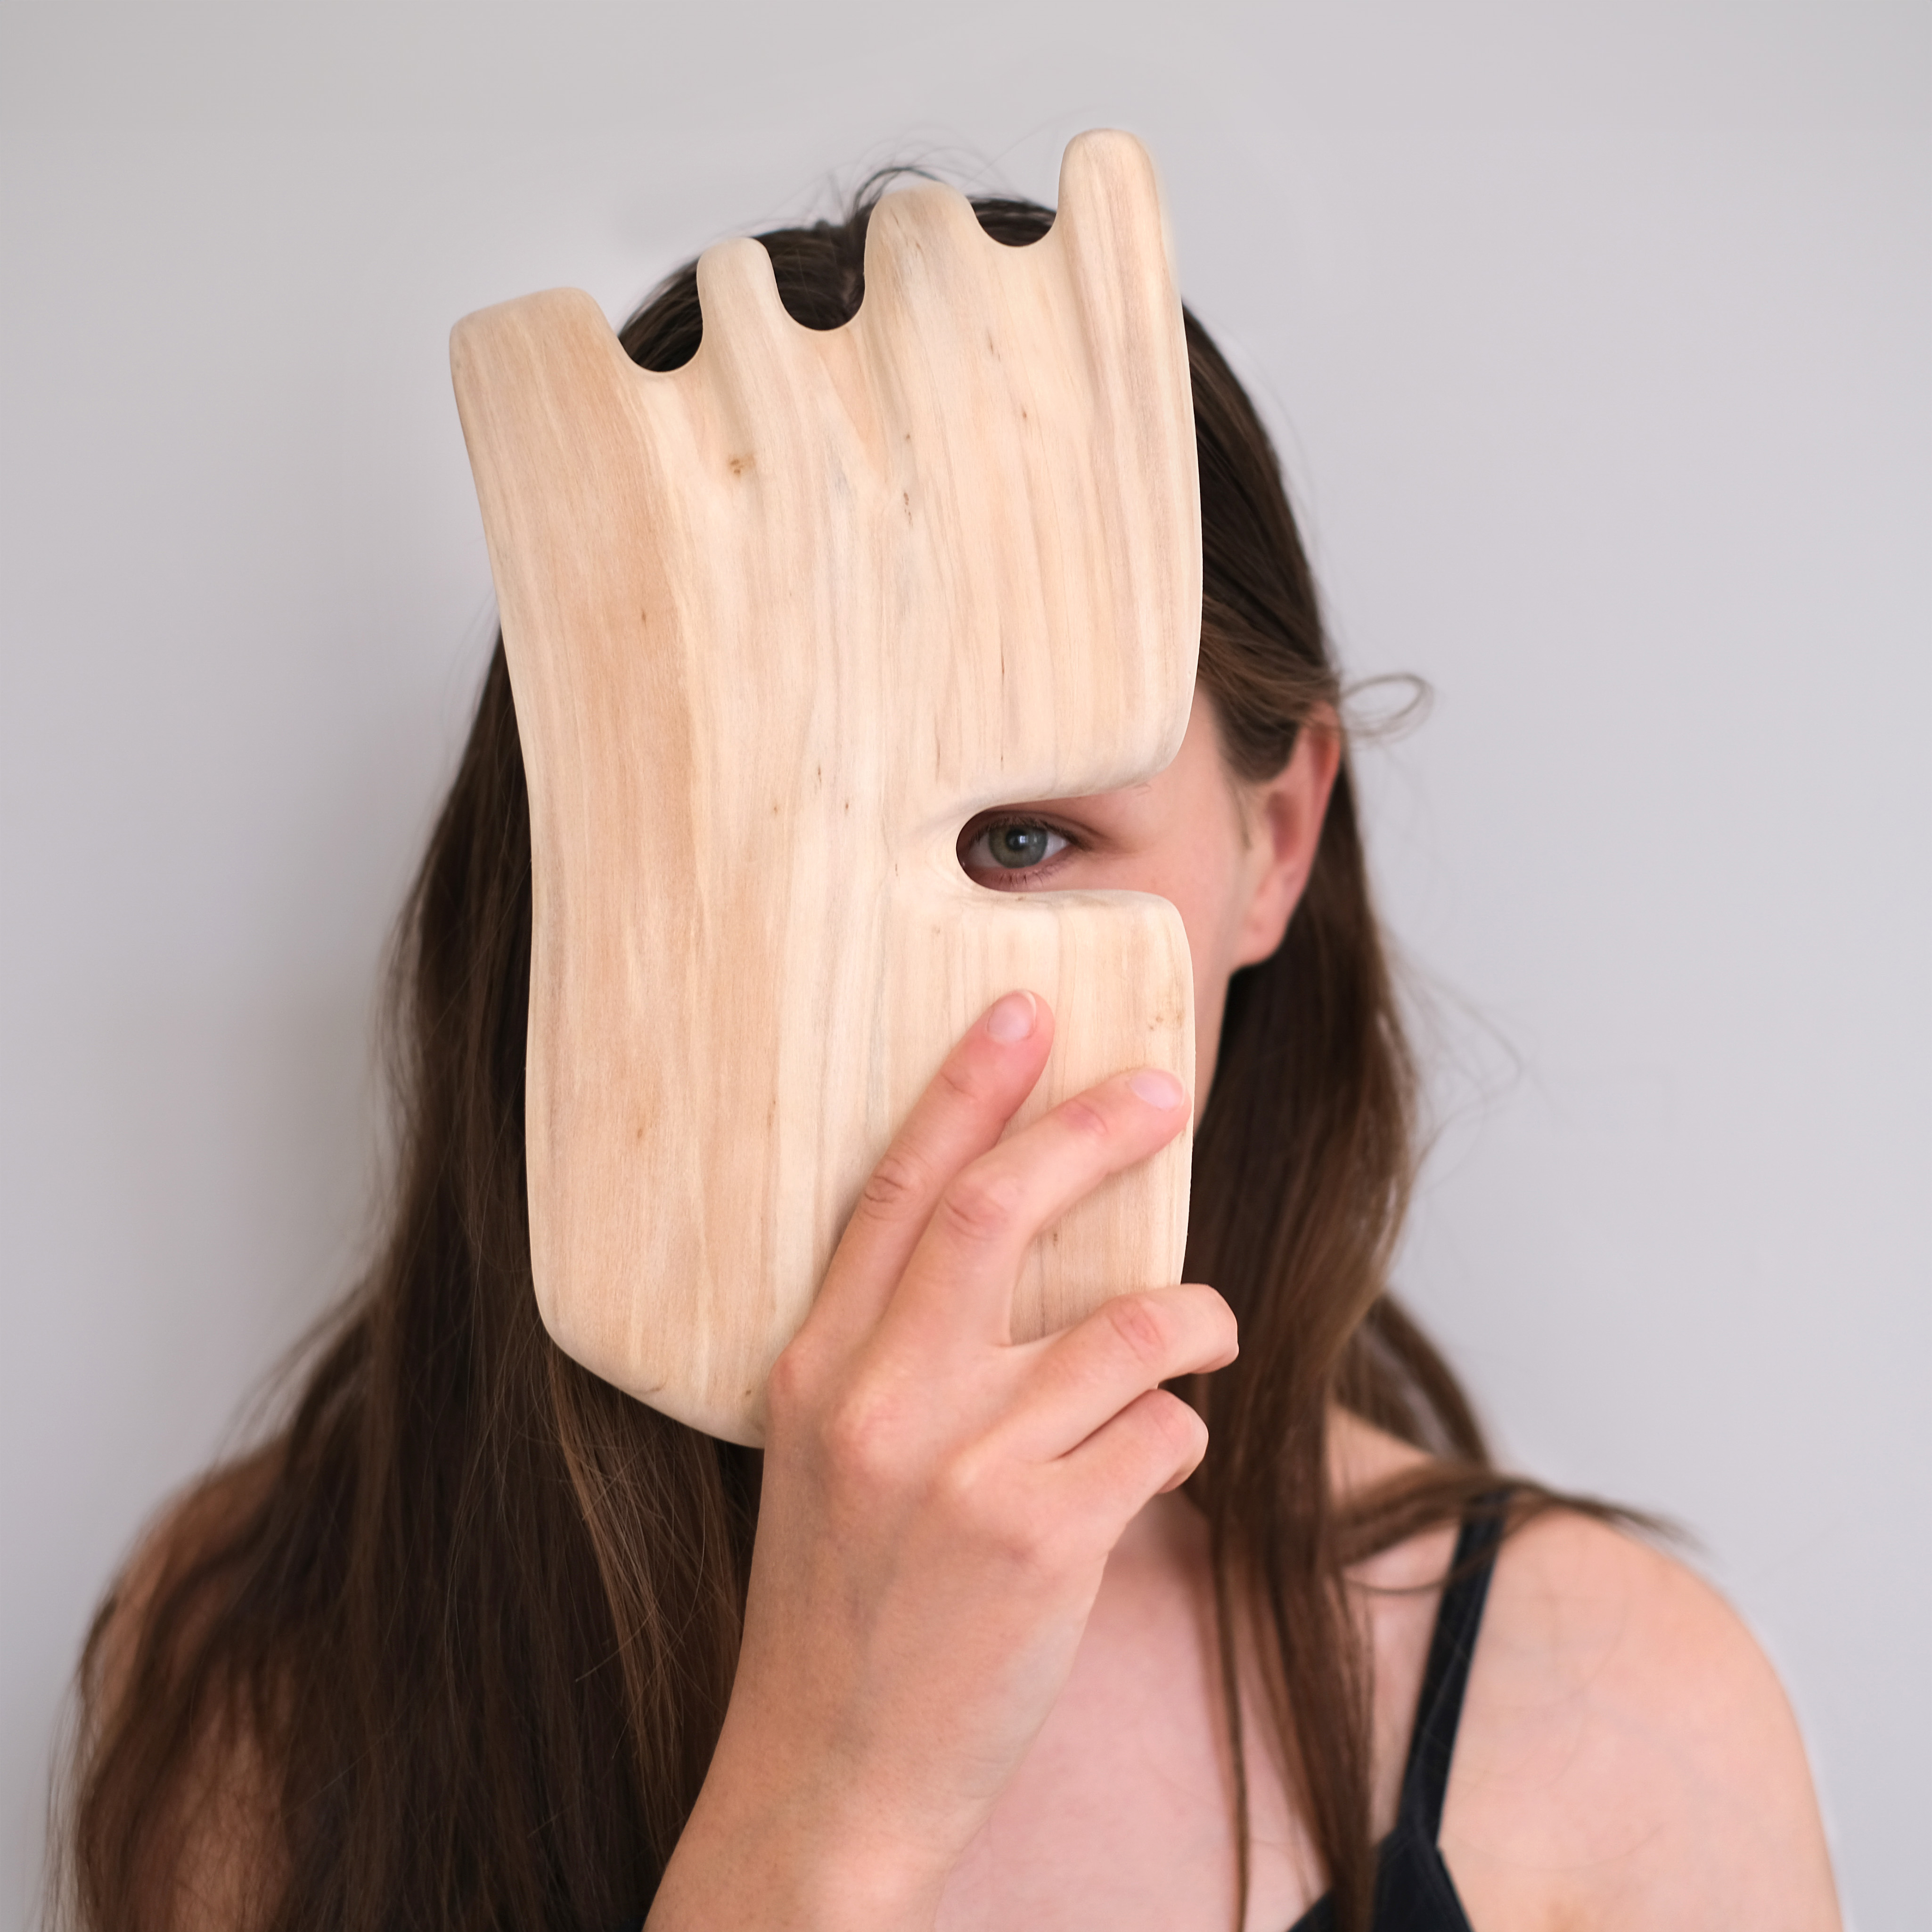 Portrait of an artist, Klára Čermáková, covering most of her face with one of her artifacts. A wooden organic object whose shape could remind you of a mask.